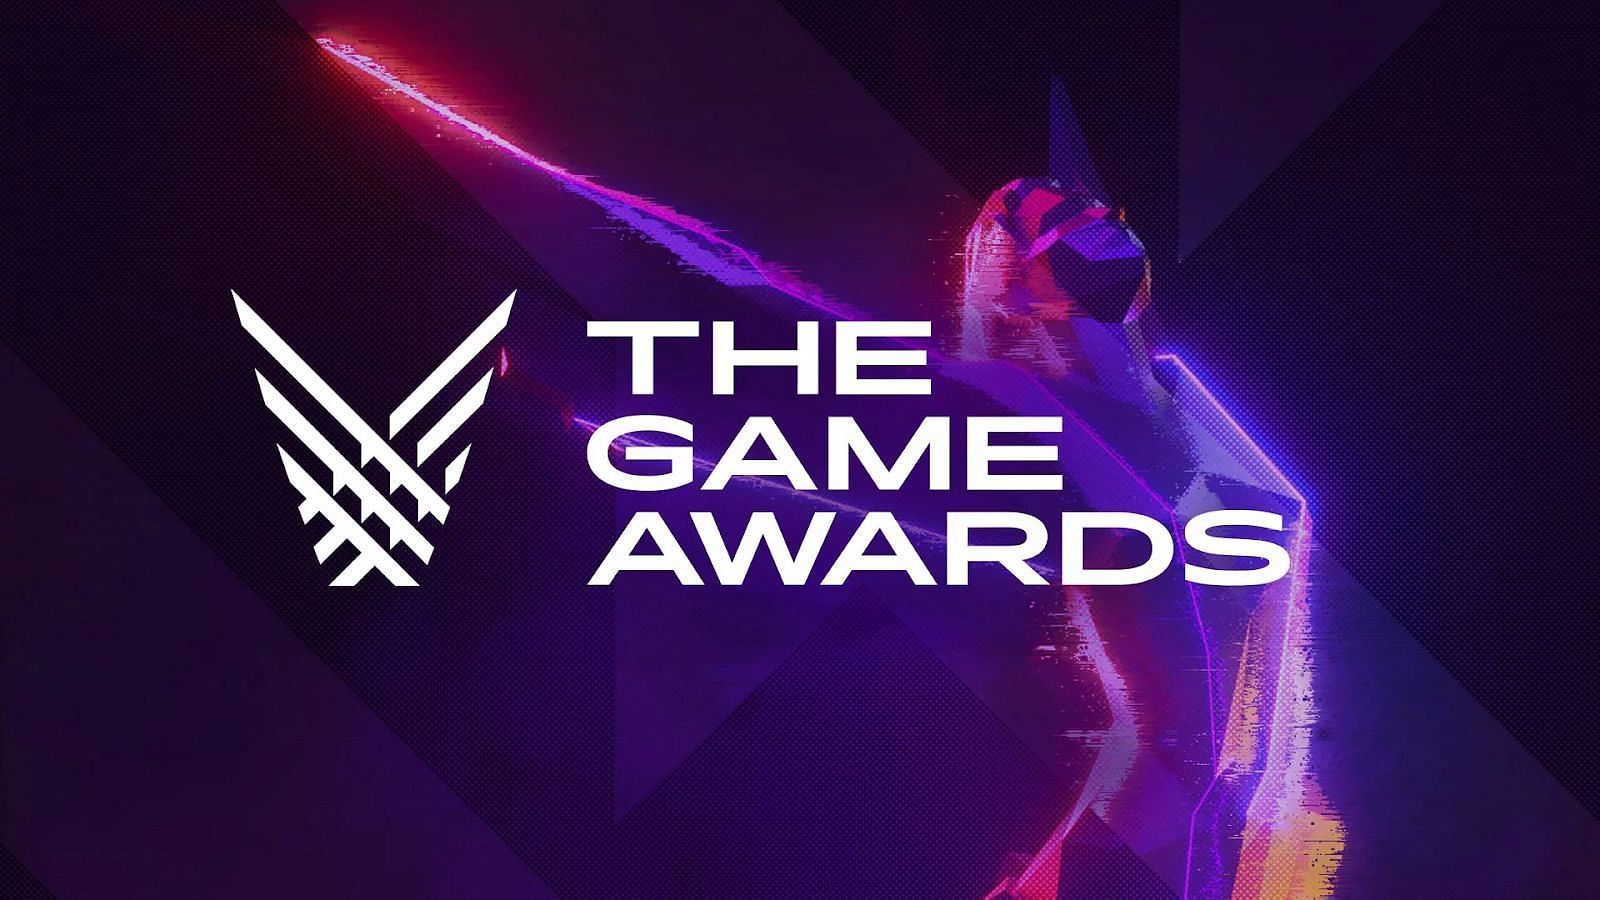 The Game Awards all nominations (Image by The Game Awards)